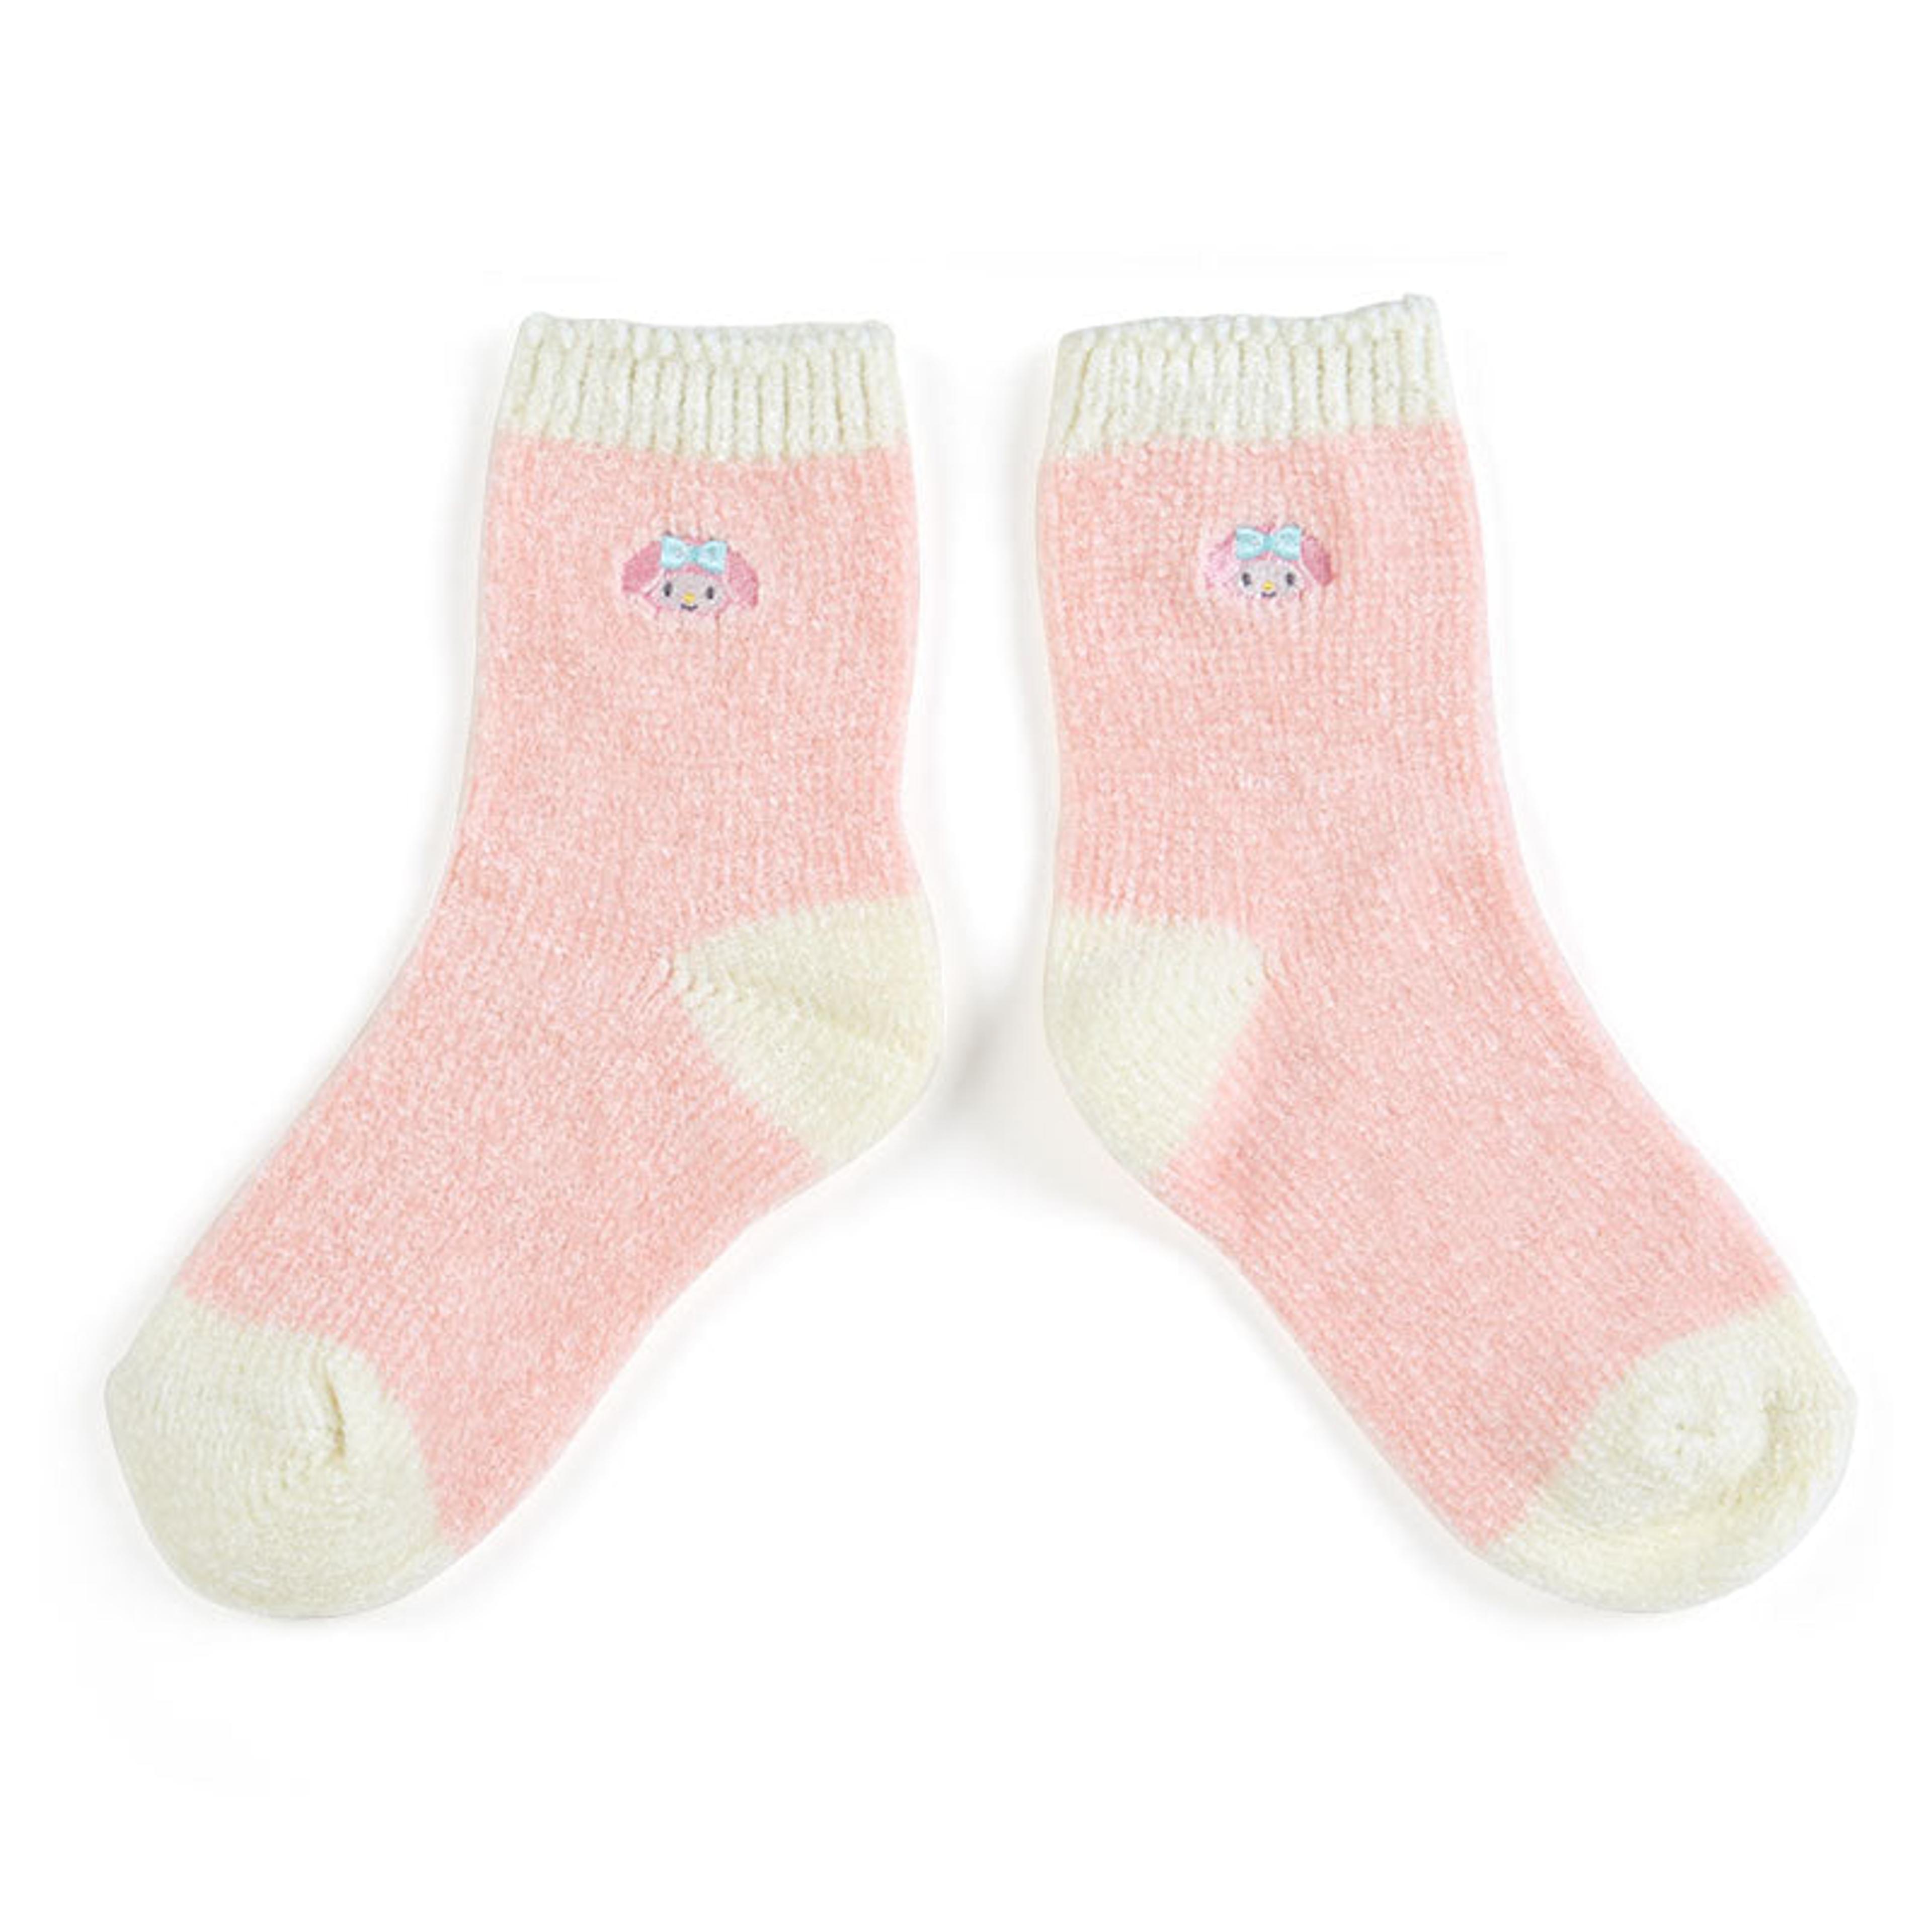 Alternate View 2 of Sanrio Characters Embroidered Chenille Adult Socks